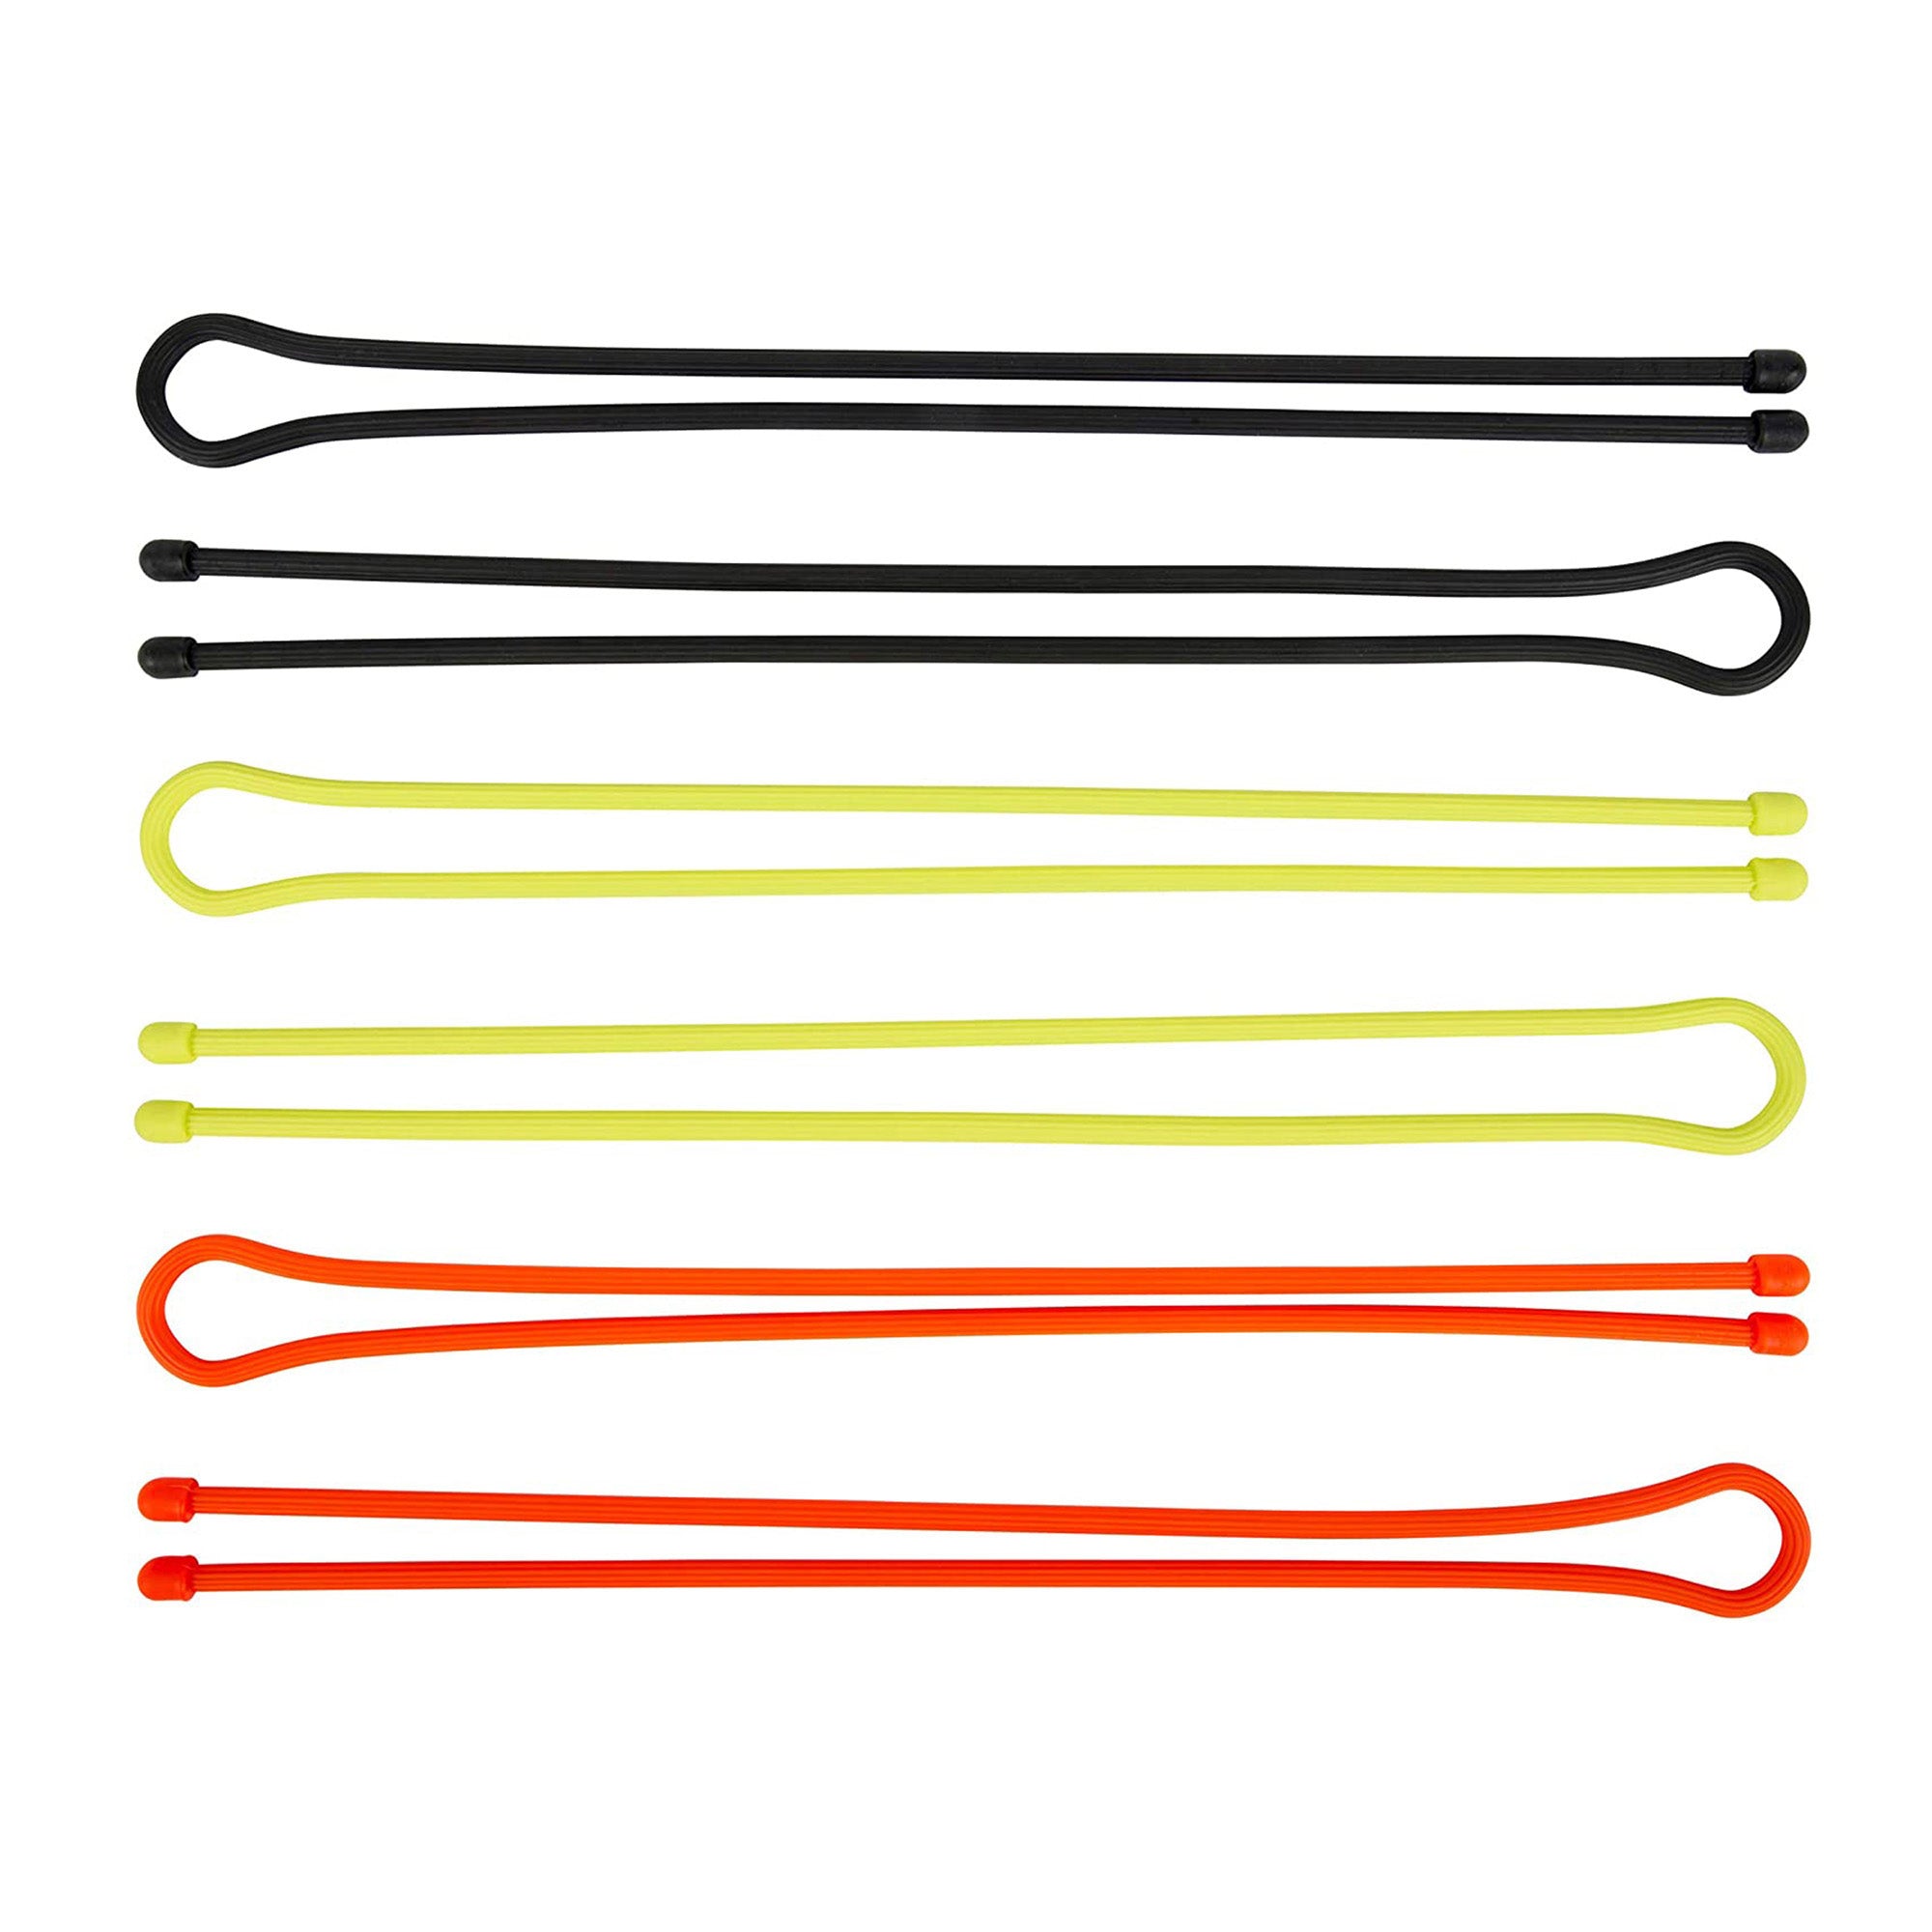 Nite Ize Gear Tie ProPack 32 in. - 6 Pack - Assorted Colours - 15-08112